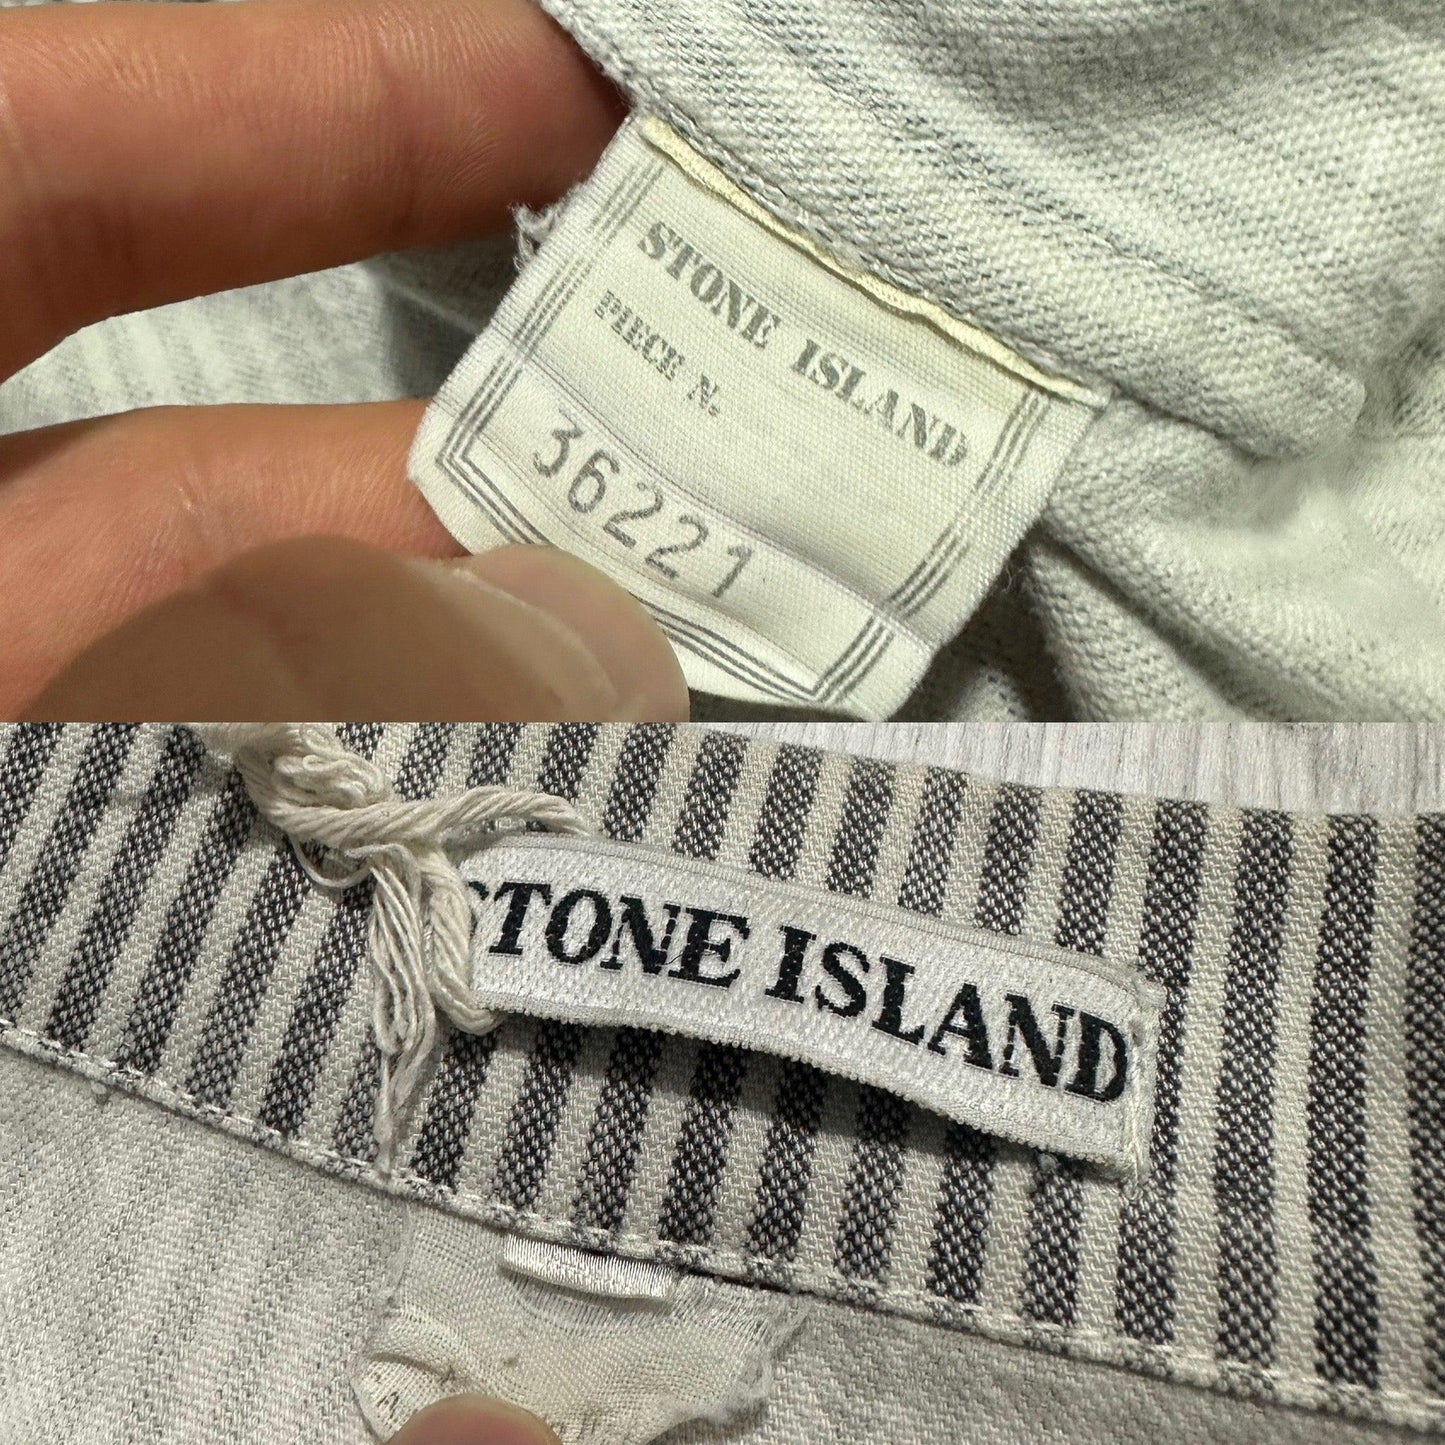 Stone Island 1986 Pigment Striped Chore Jacket with Green Edge Badge - Known Source